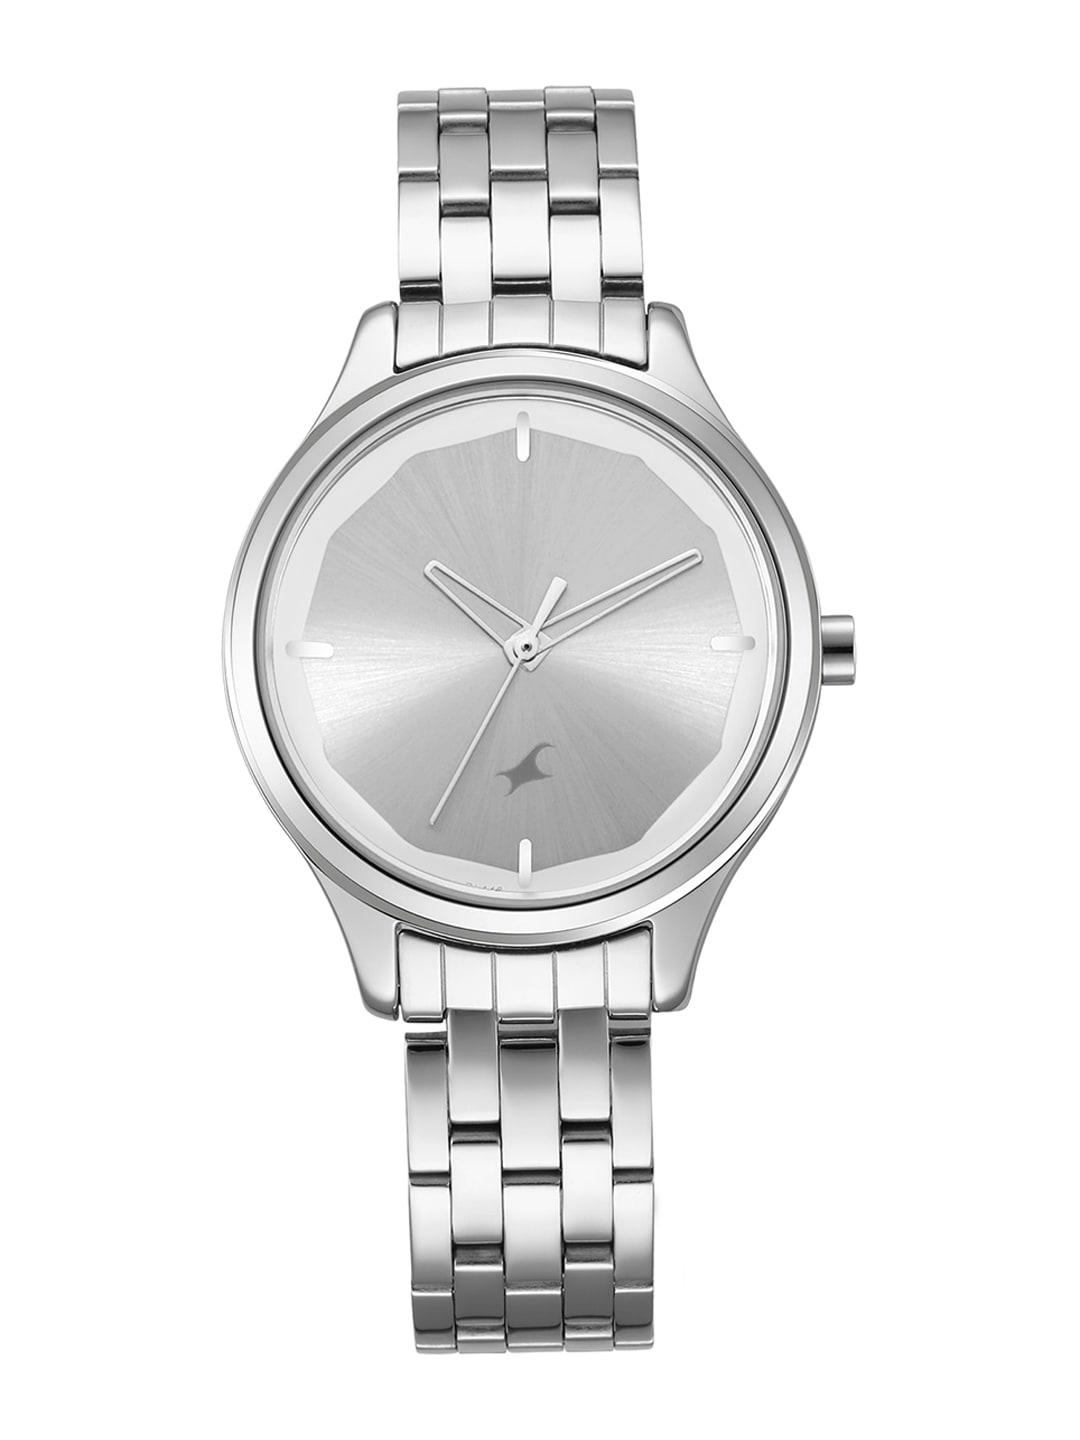 fastrack-stunners-1.0-women-silver-toned-analogue-watch-6248sm01